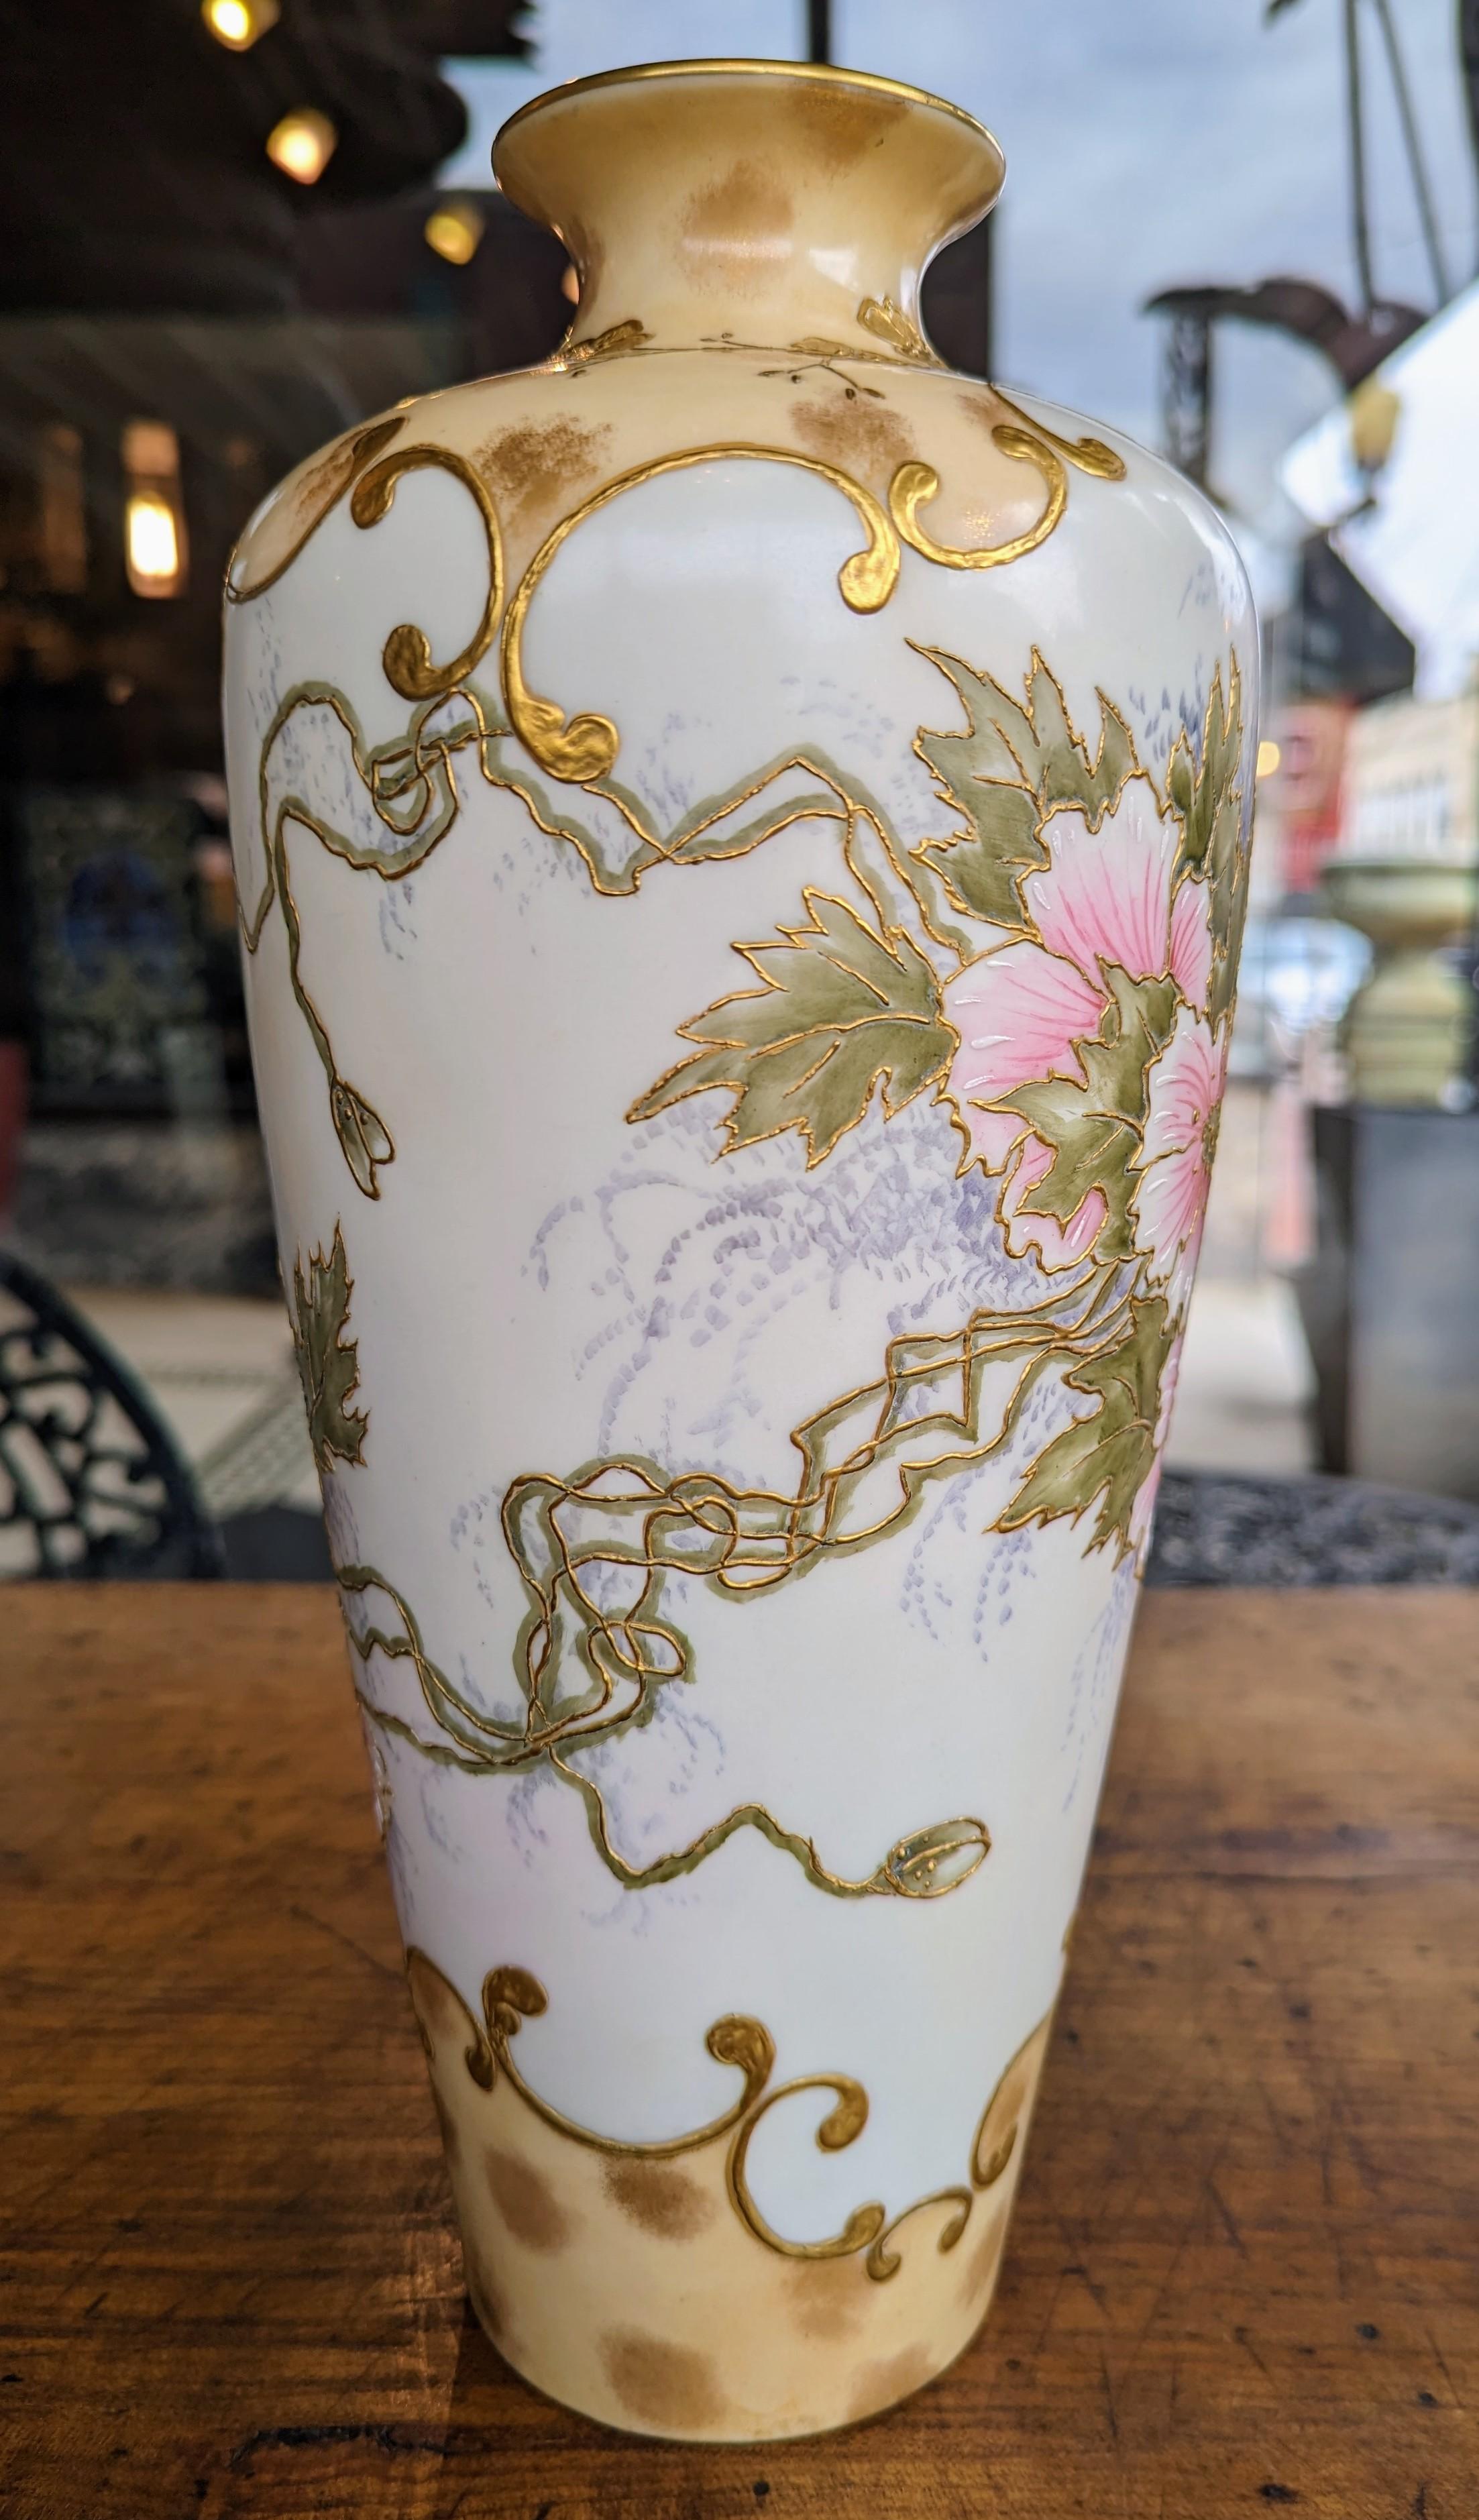 Stunning antique Belleek Willets porcelain vase, featuring a gorgeous floral motif with gilded accents. This hand painted work of art is signed by the artist 